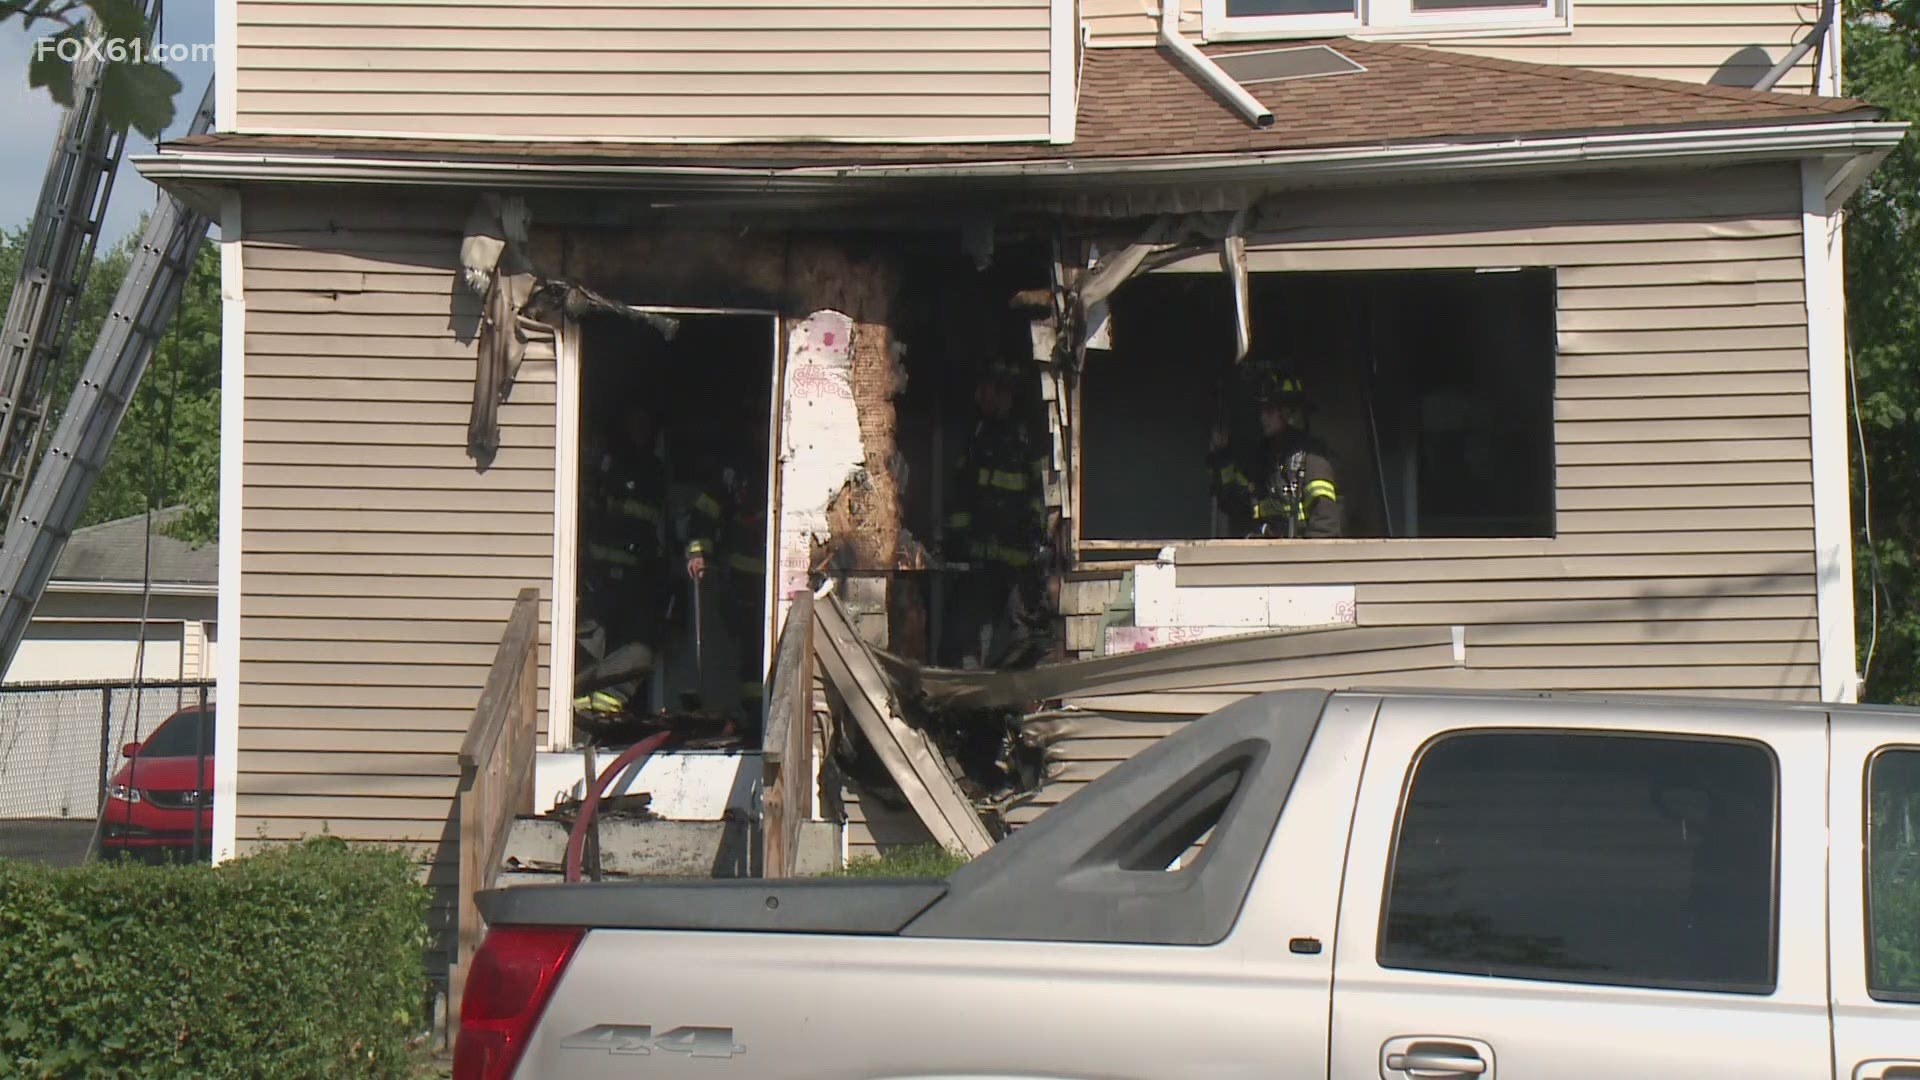 The fire happened on Milford Street. Fire officials say it happened in the porch area.